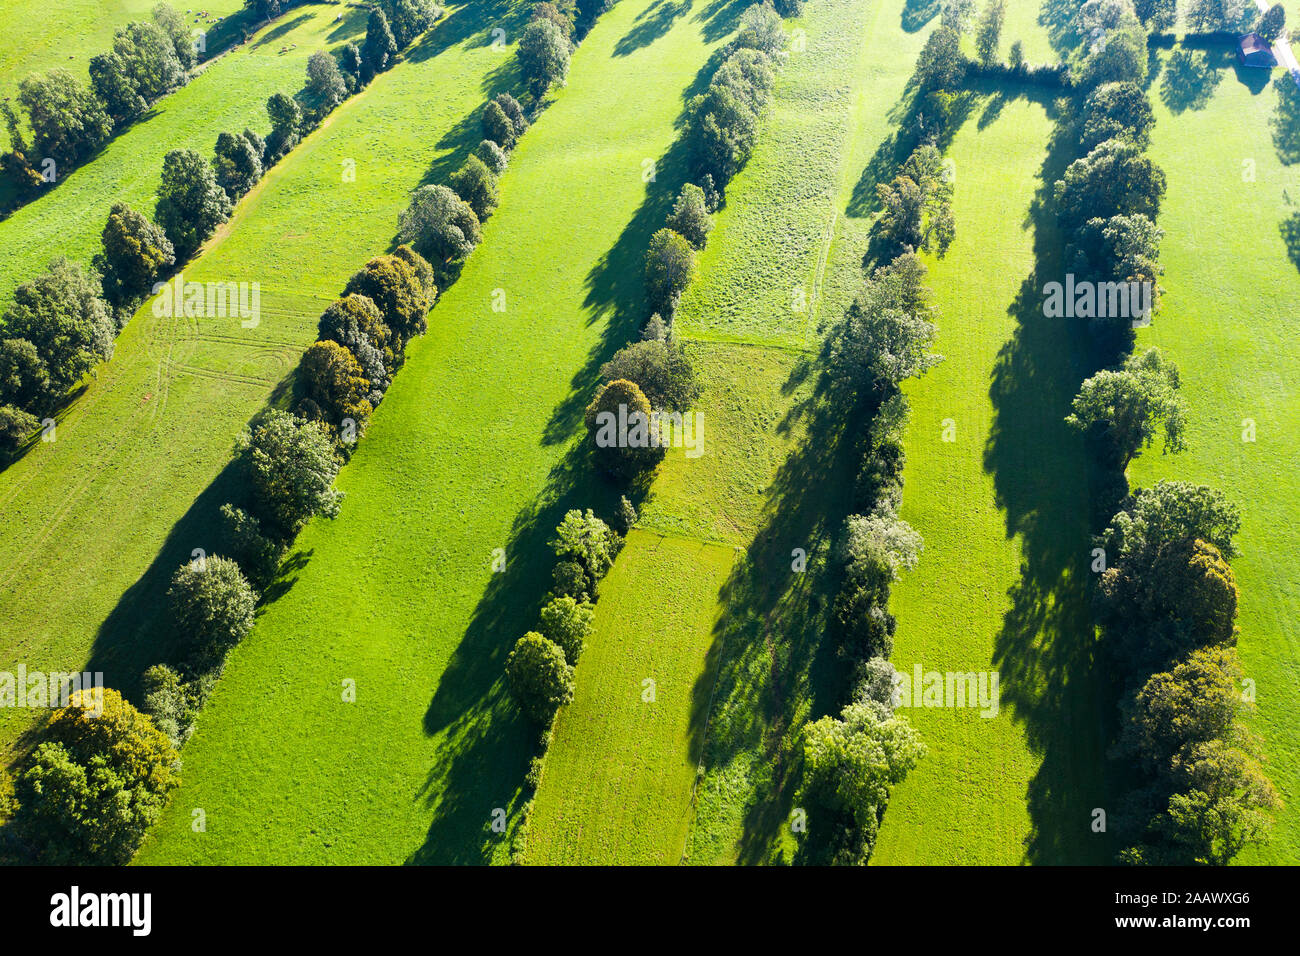 High angle view of Natural monument hedge landscape, Gaissach, Lenggries, Isarwinkel, Upper Bavaria, Bavaria, Germany Stock Photo